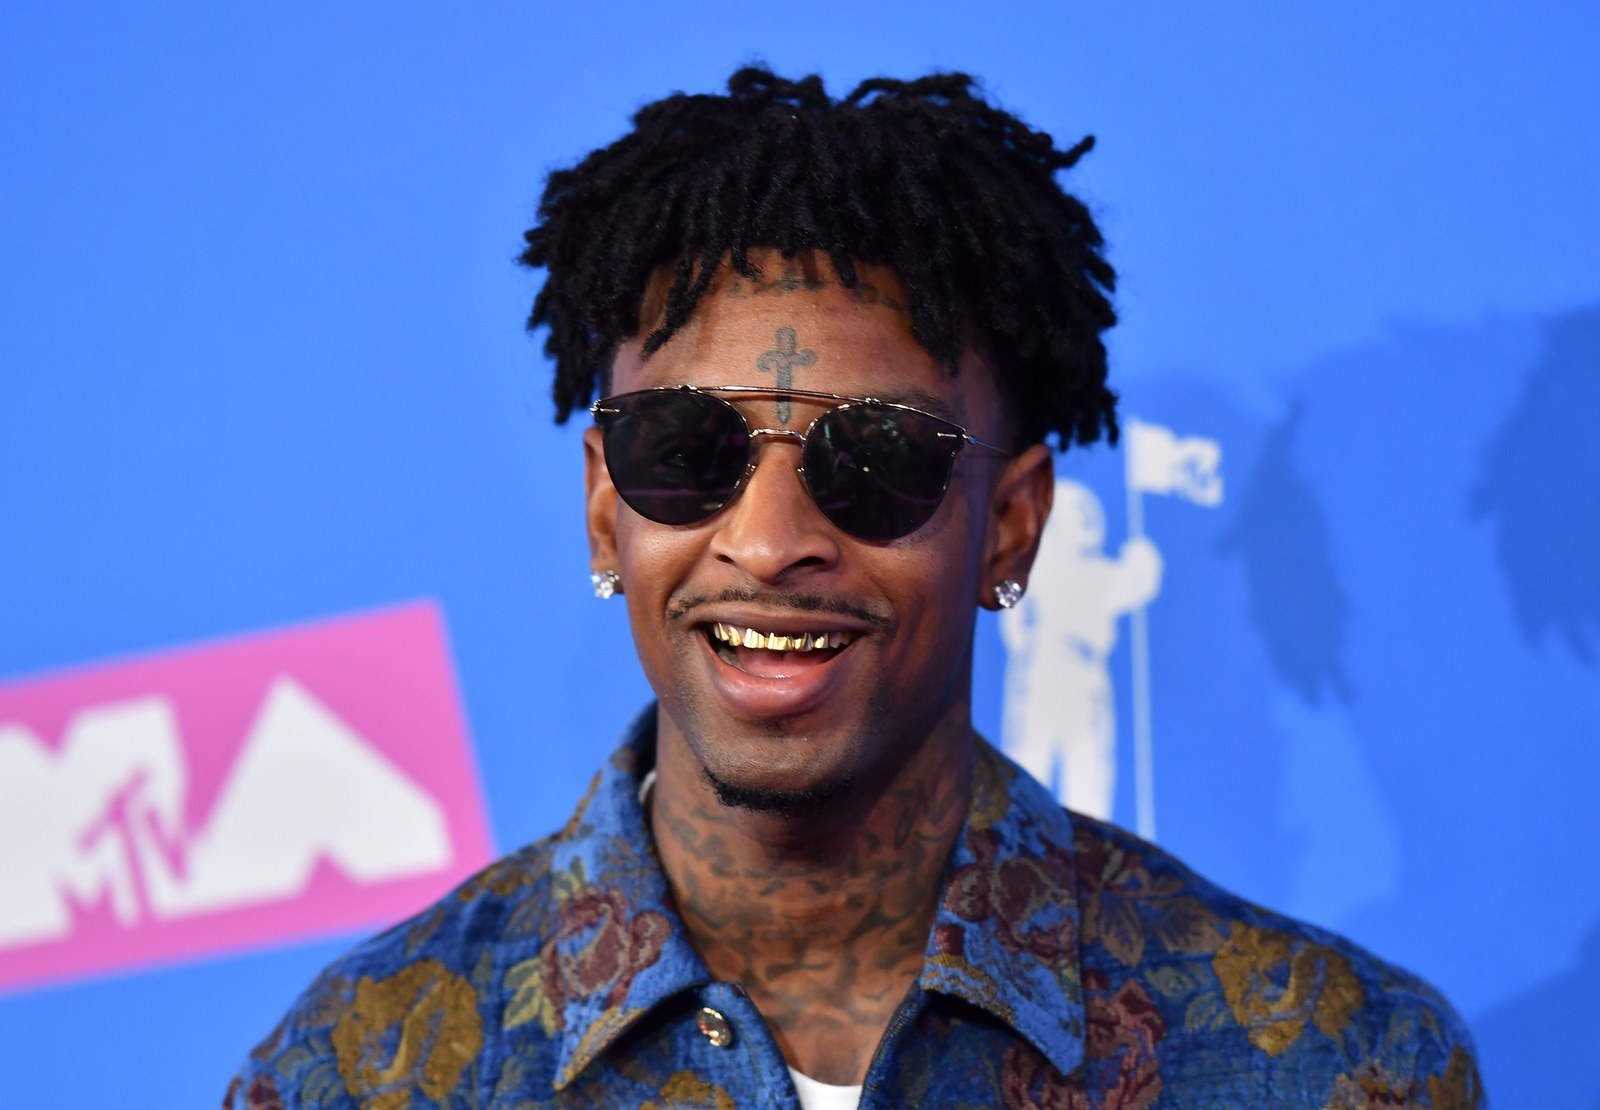 21 Savage Was Released By ICE To Await His Deportation Hearing